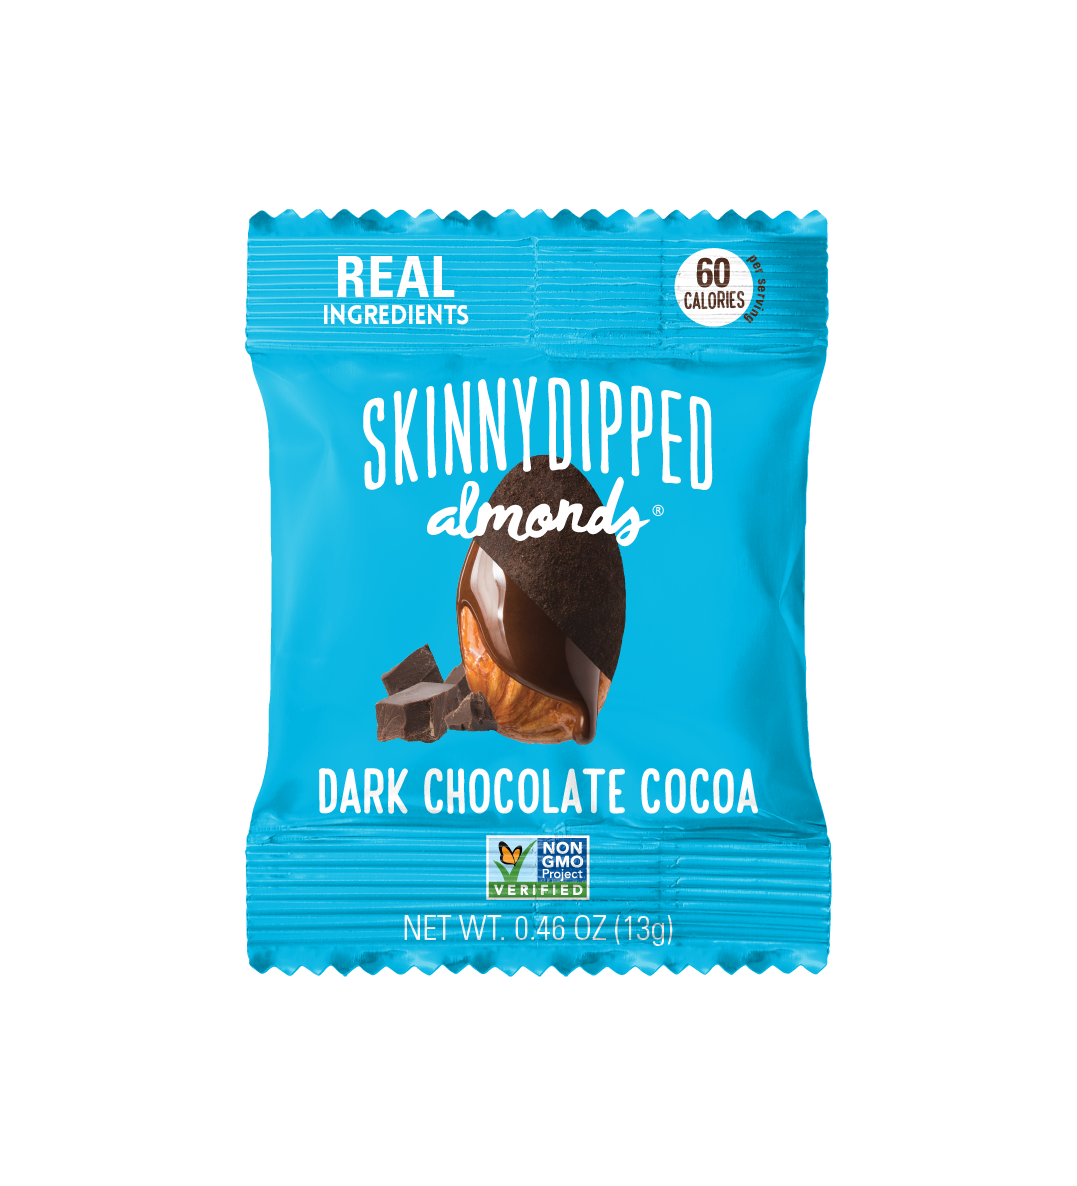 Skinny Dipped Almonds Dark Chocolate Cocoa Almonds Single Serve Packets-0.46 oz.-24/Case